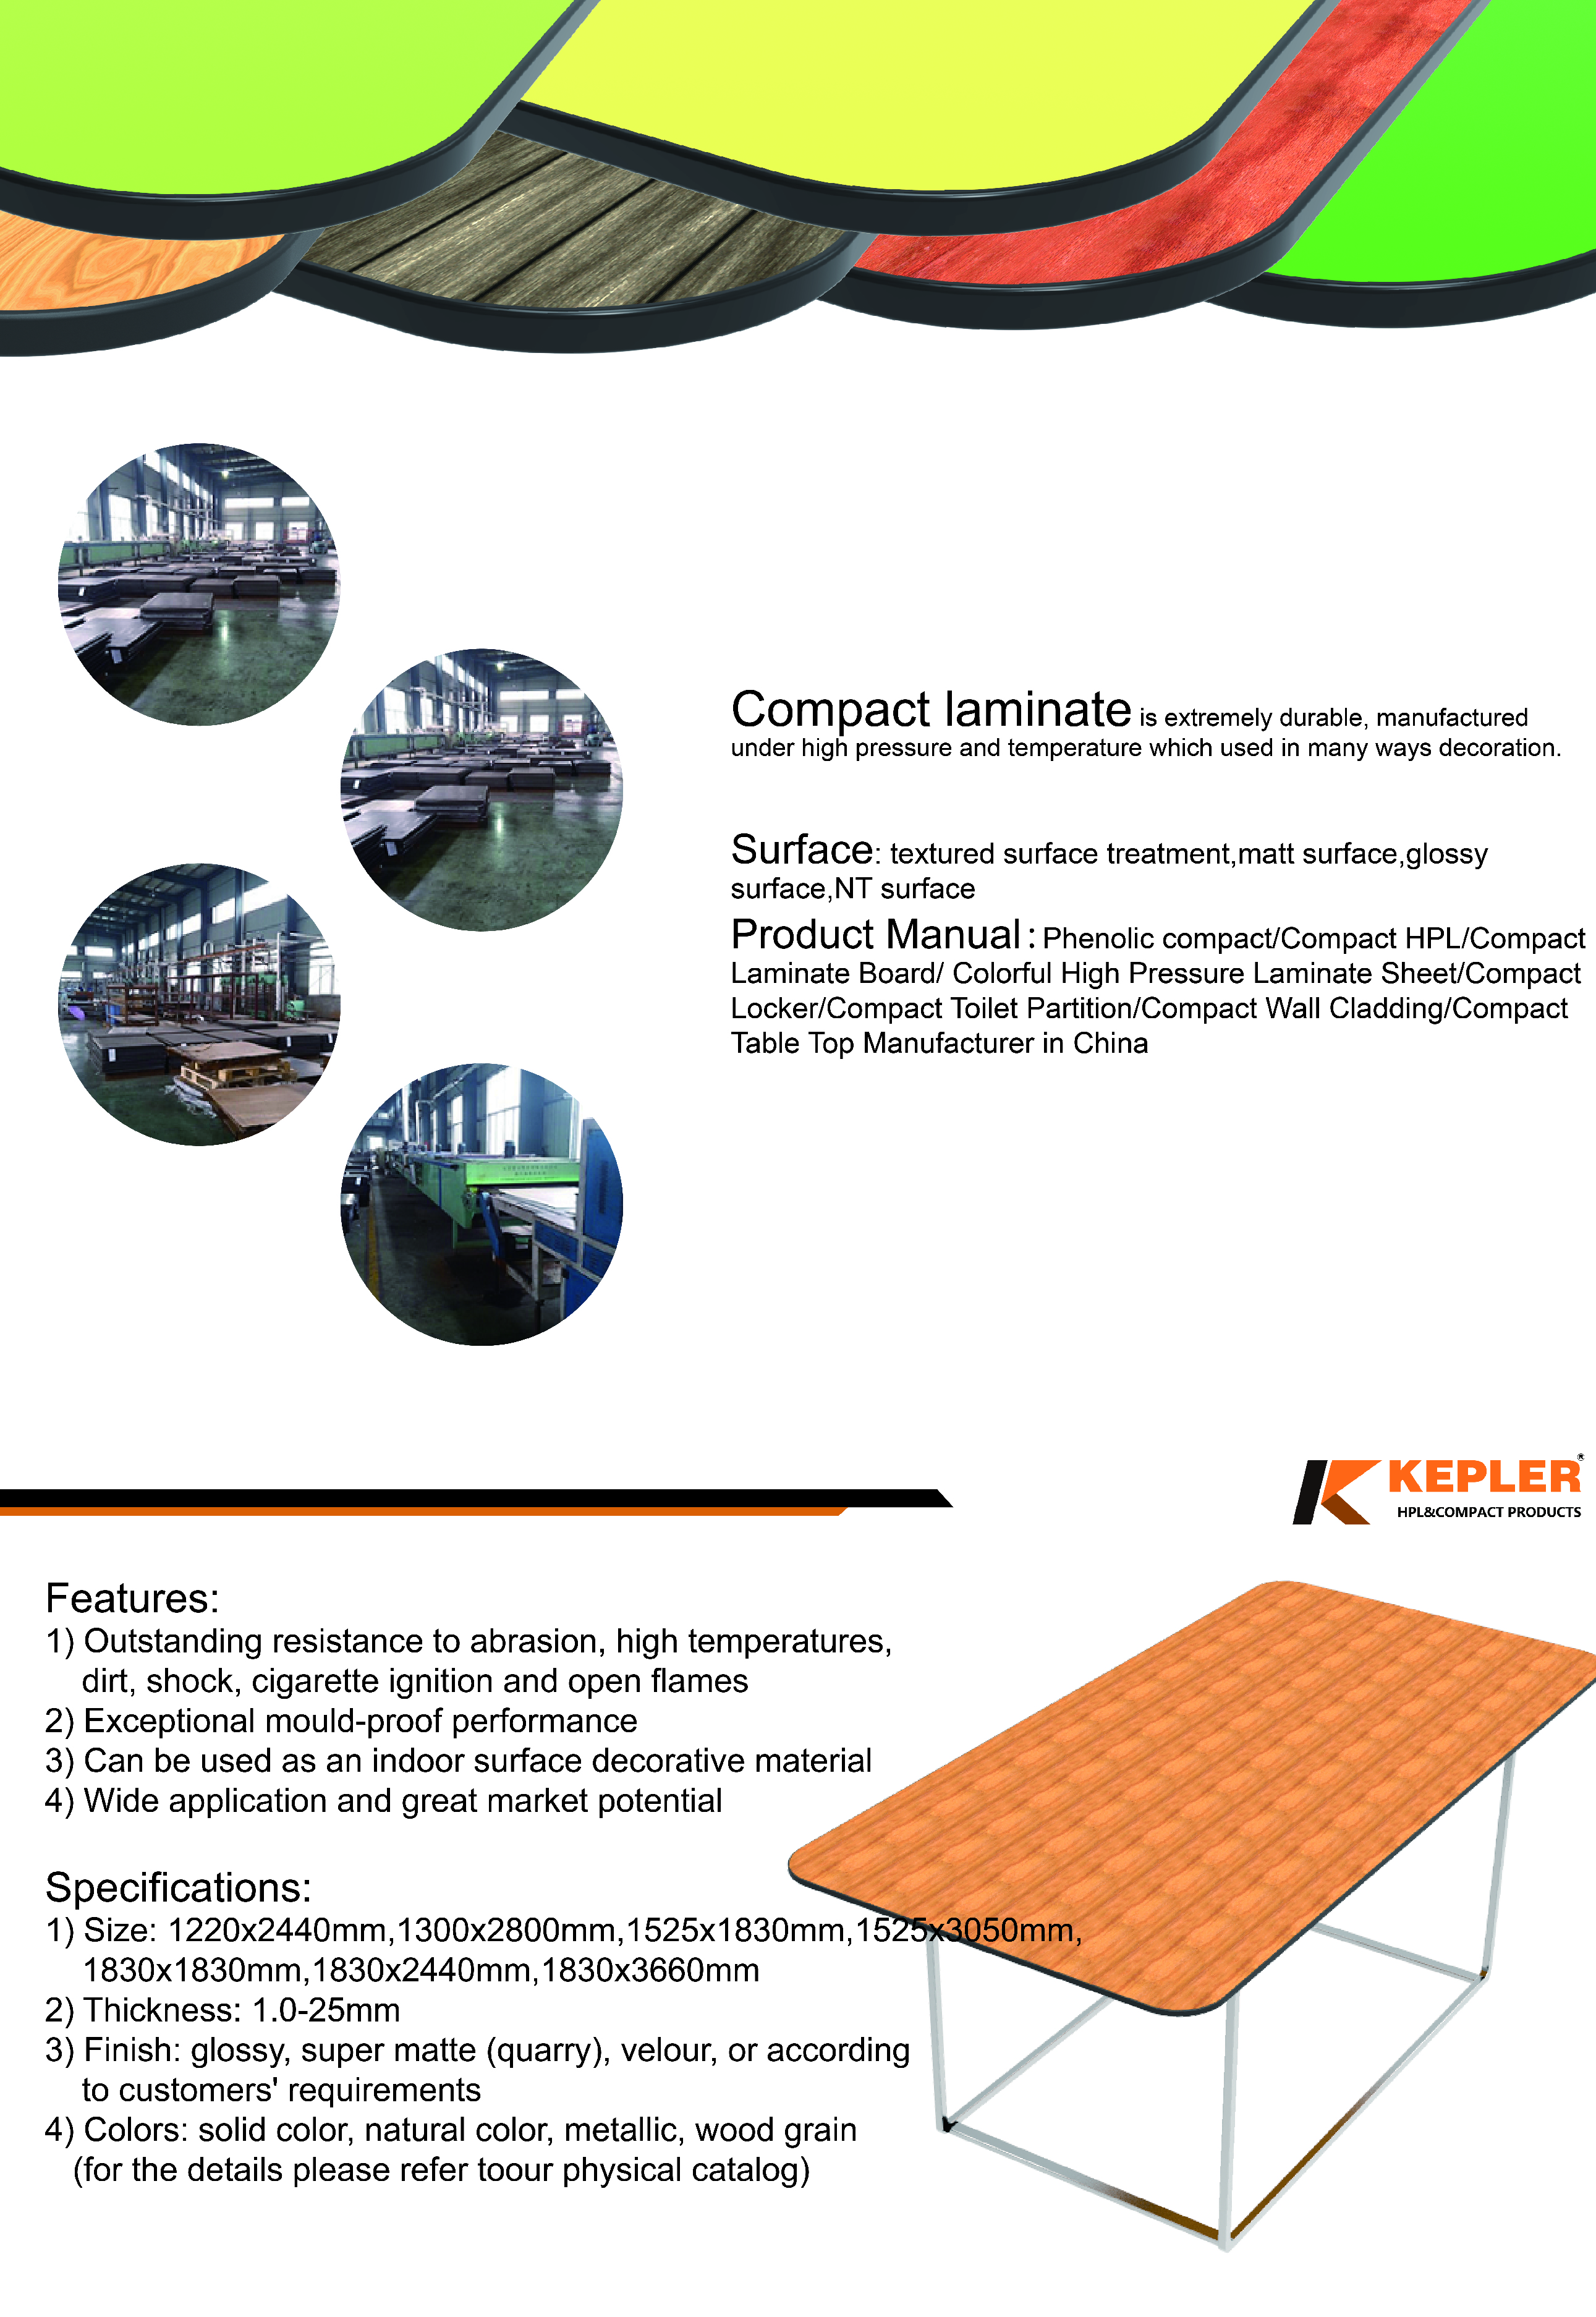 what about table top,kepler brand HPL table top is made of high grade phenolic compact laminate with features on weather resistant, scratch resistant, UV-resistant(for outdoor grade), Widely used in surface decoration of restaurant, cafe ,school, office , garden ,swimming pool ,and other commercial center. They are superb in quality and fashionable in design. Our tabletop have enjoyed a very good reputation in global market.